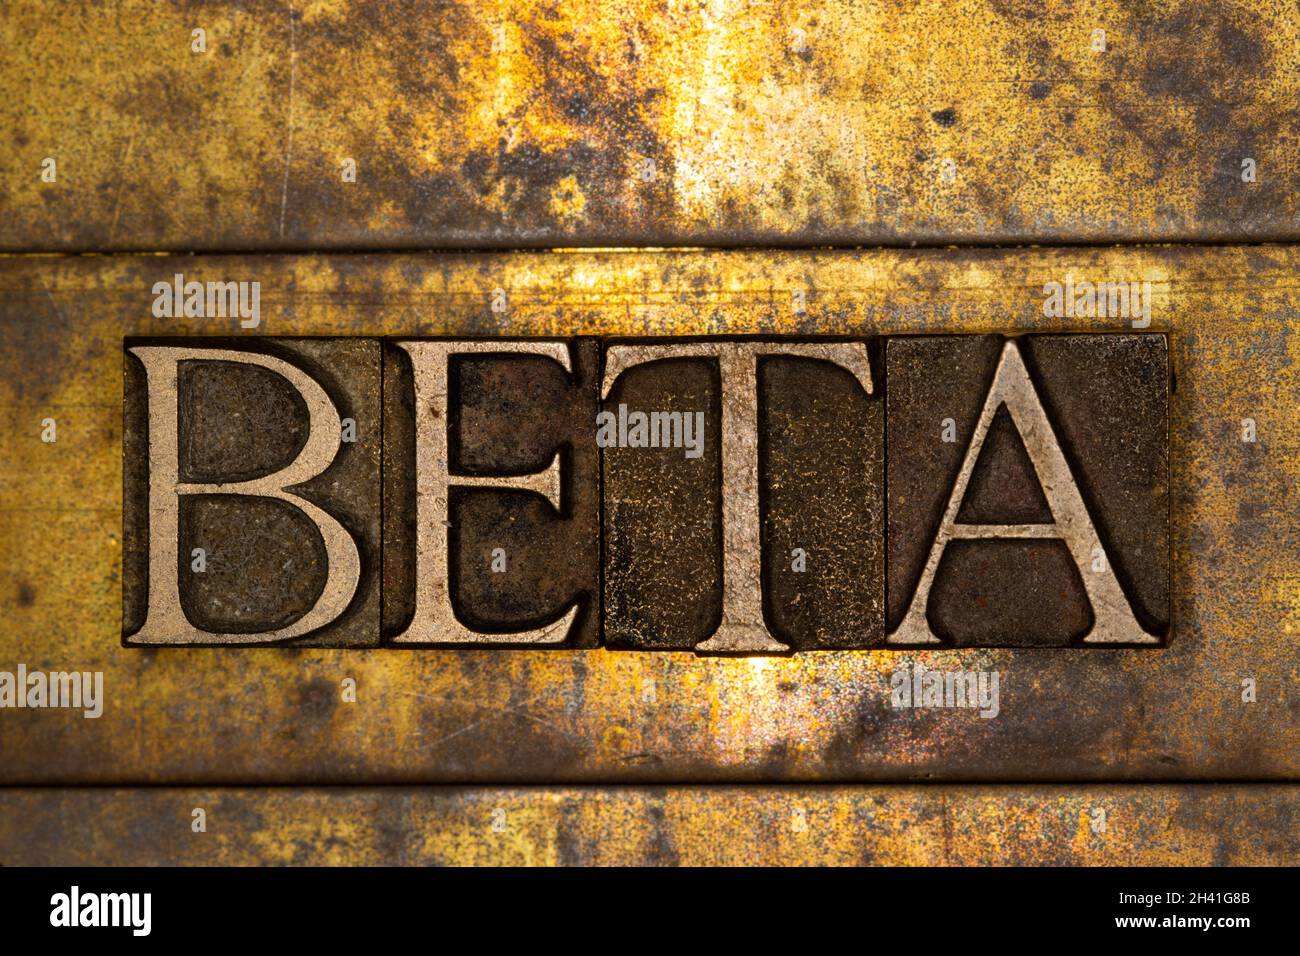 Beta text message on textured grunge copper and vintage gold background Stock Photo